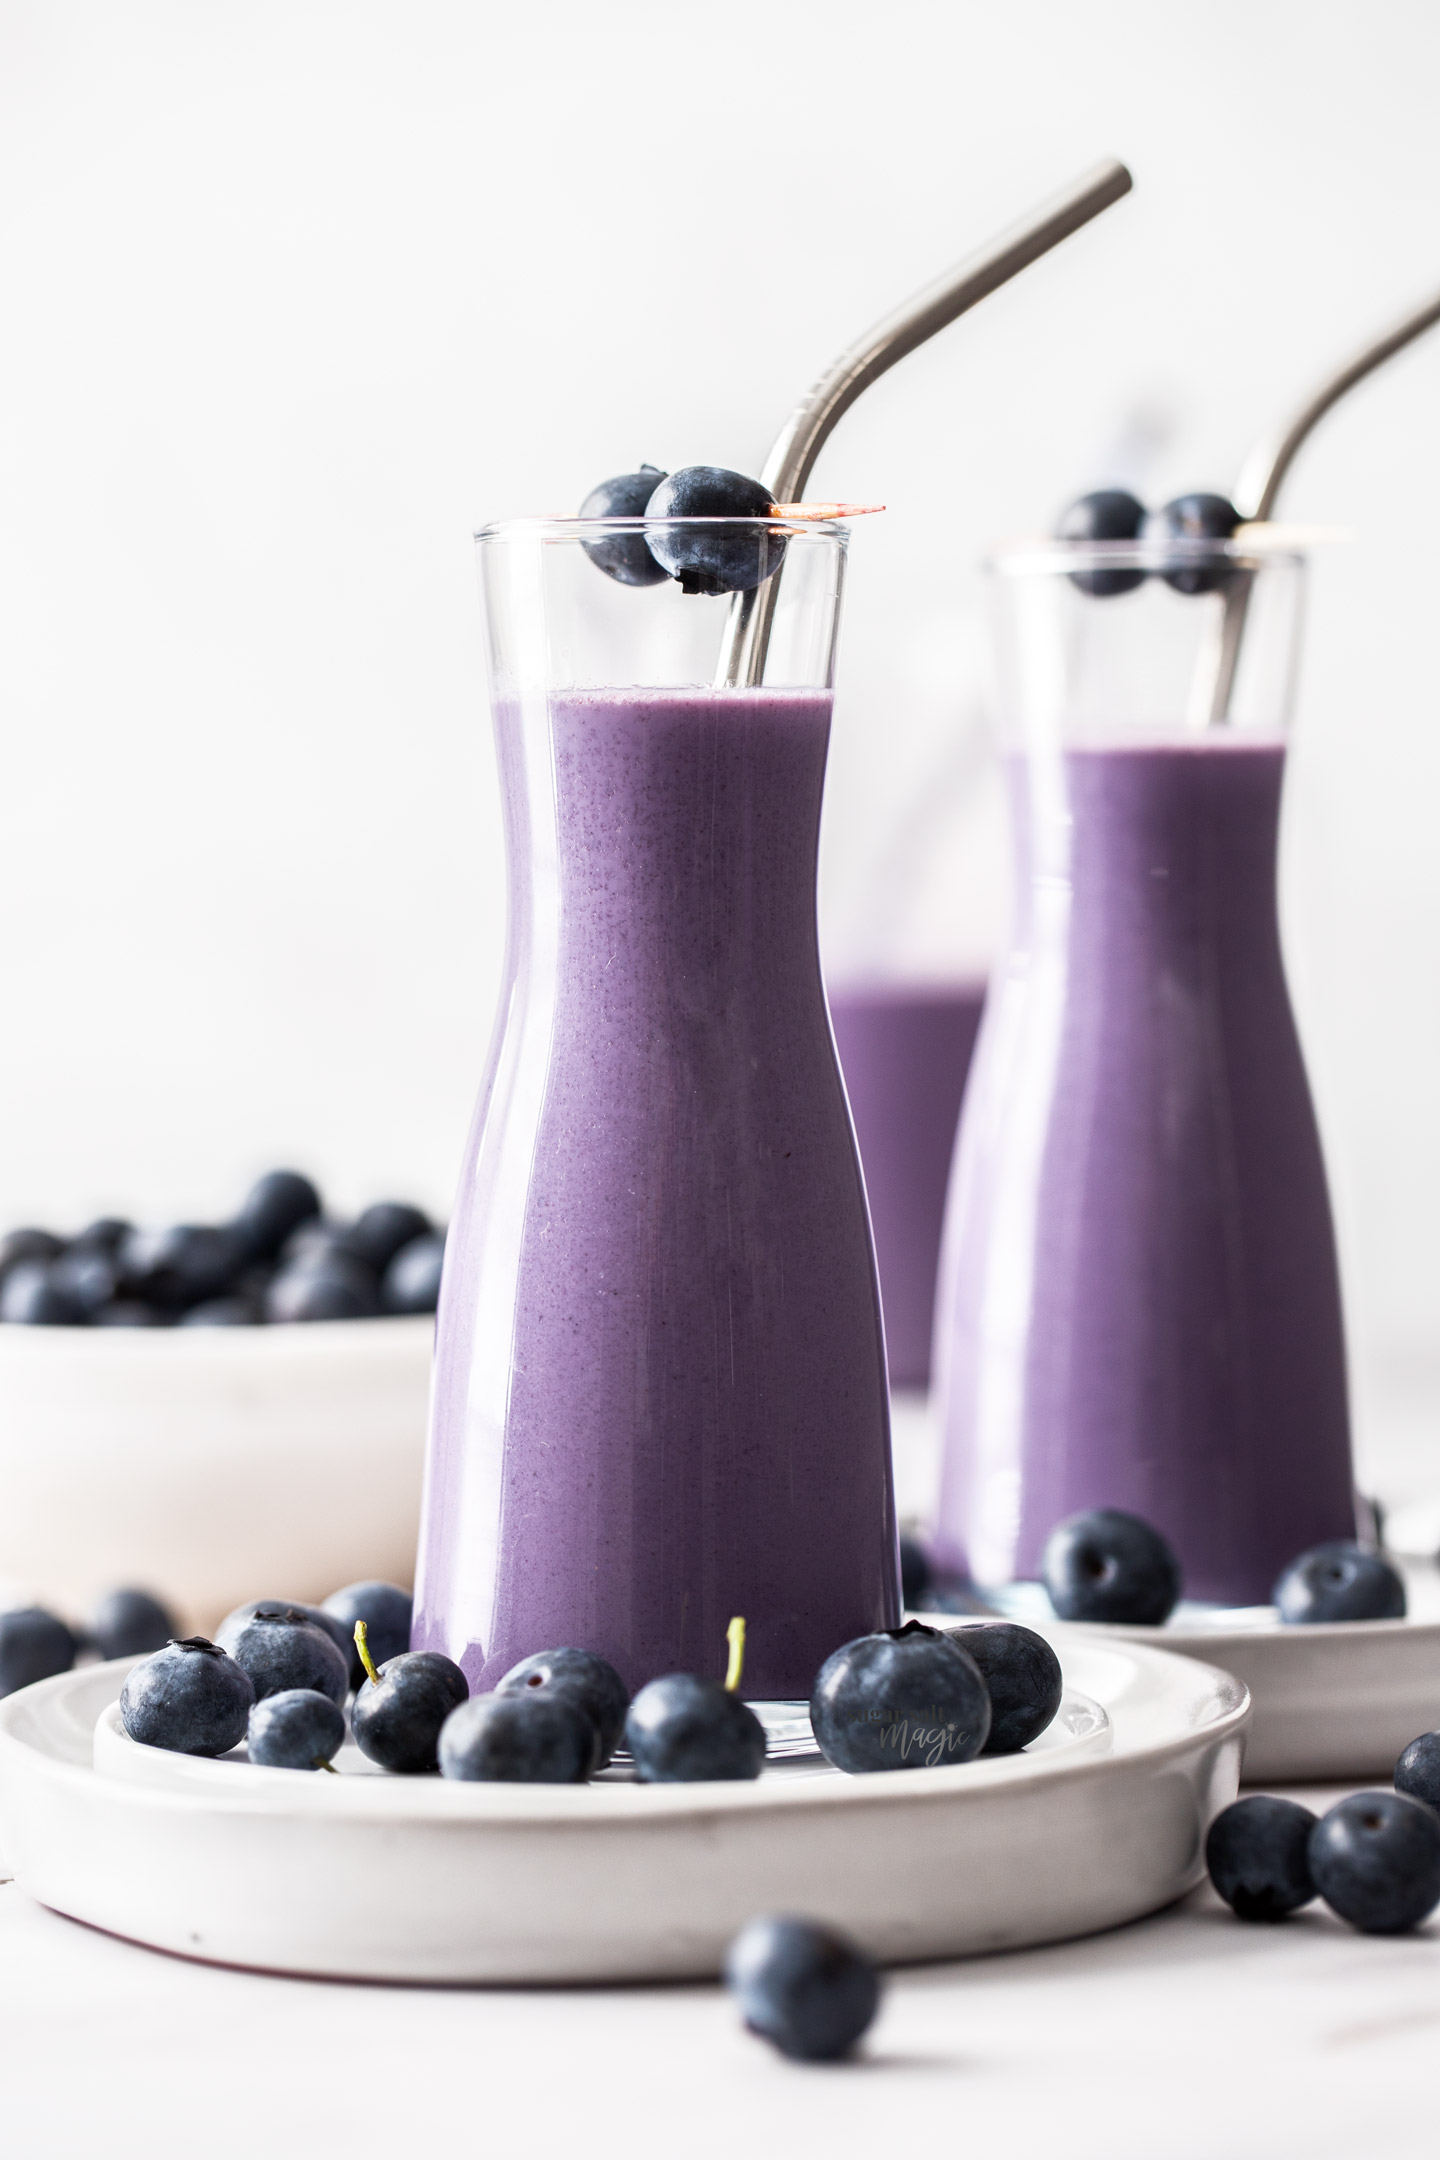 Two tall glasses filled with blueberry milk, surrounded by blueberries.